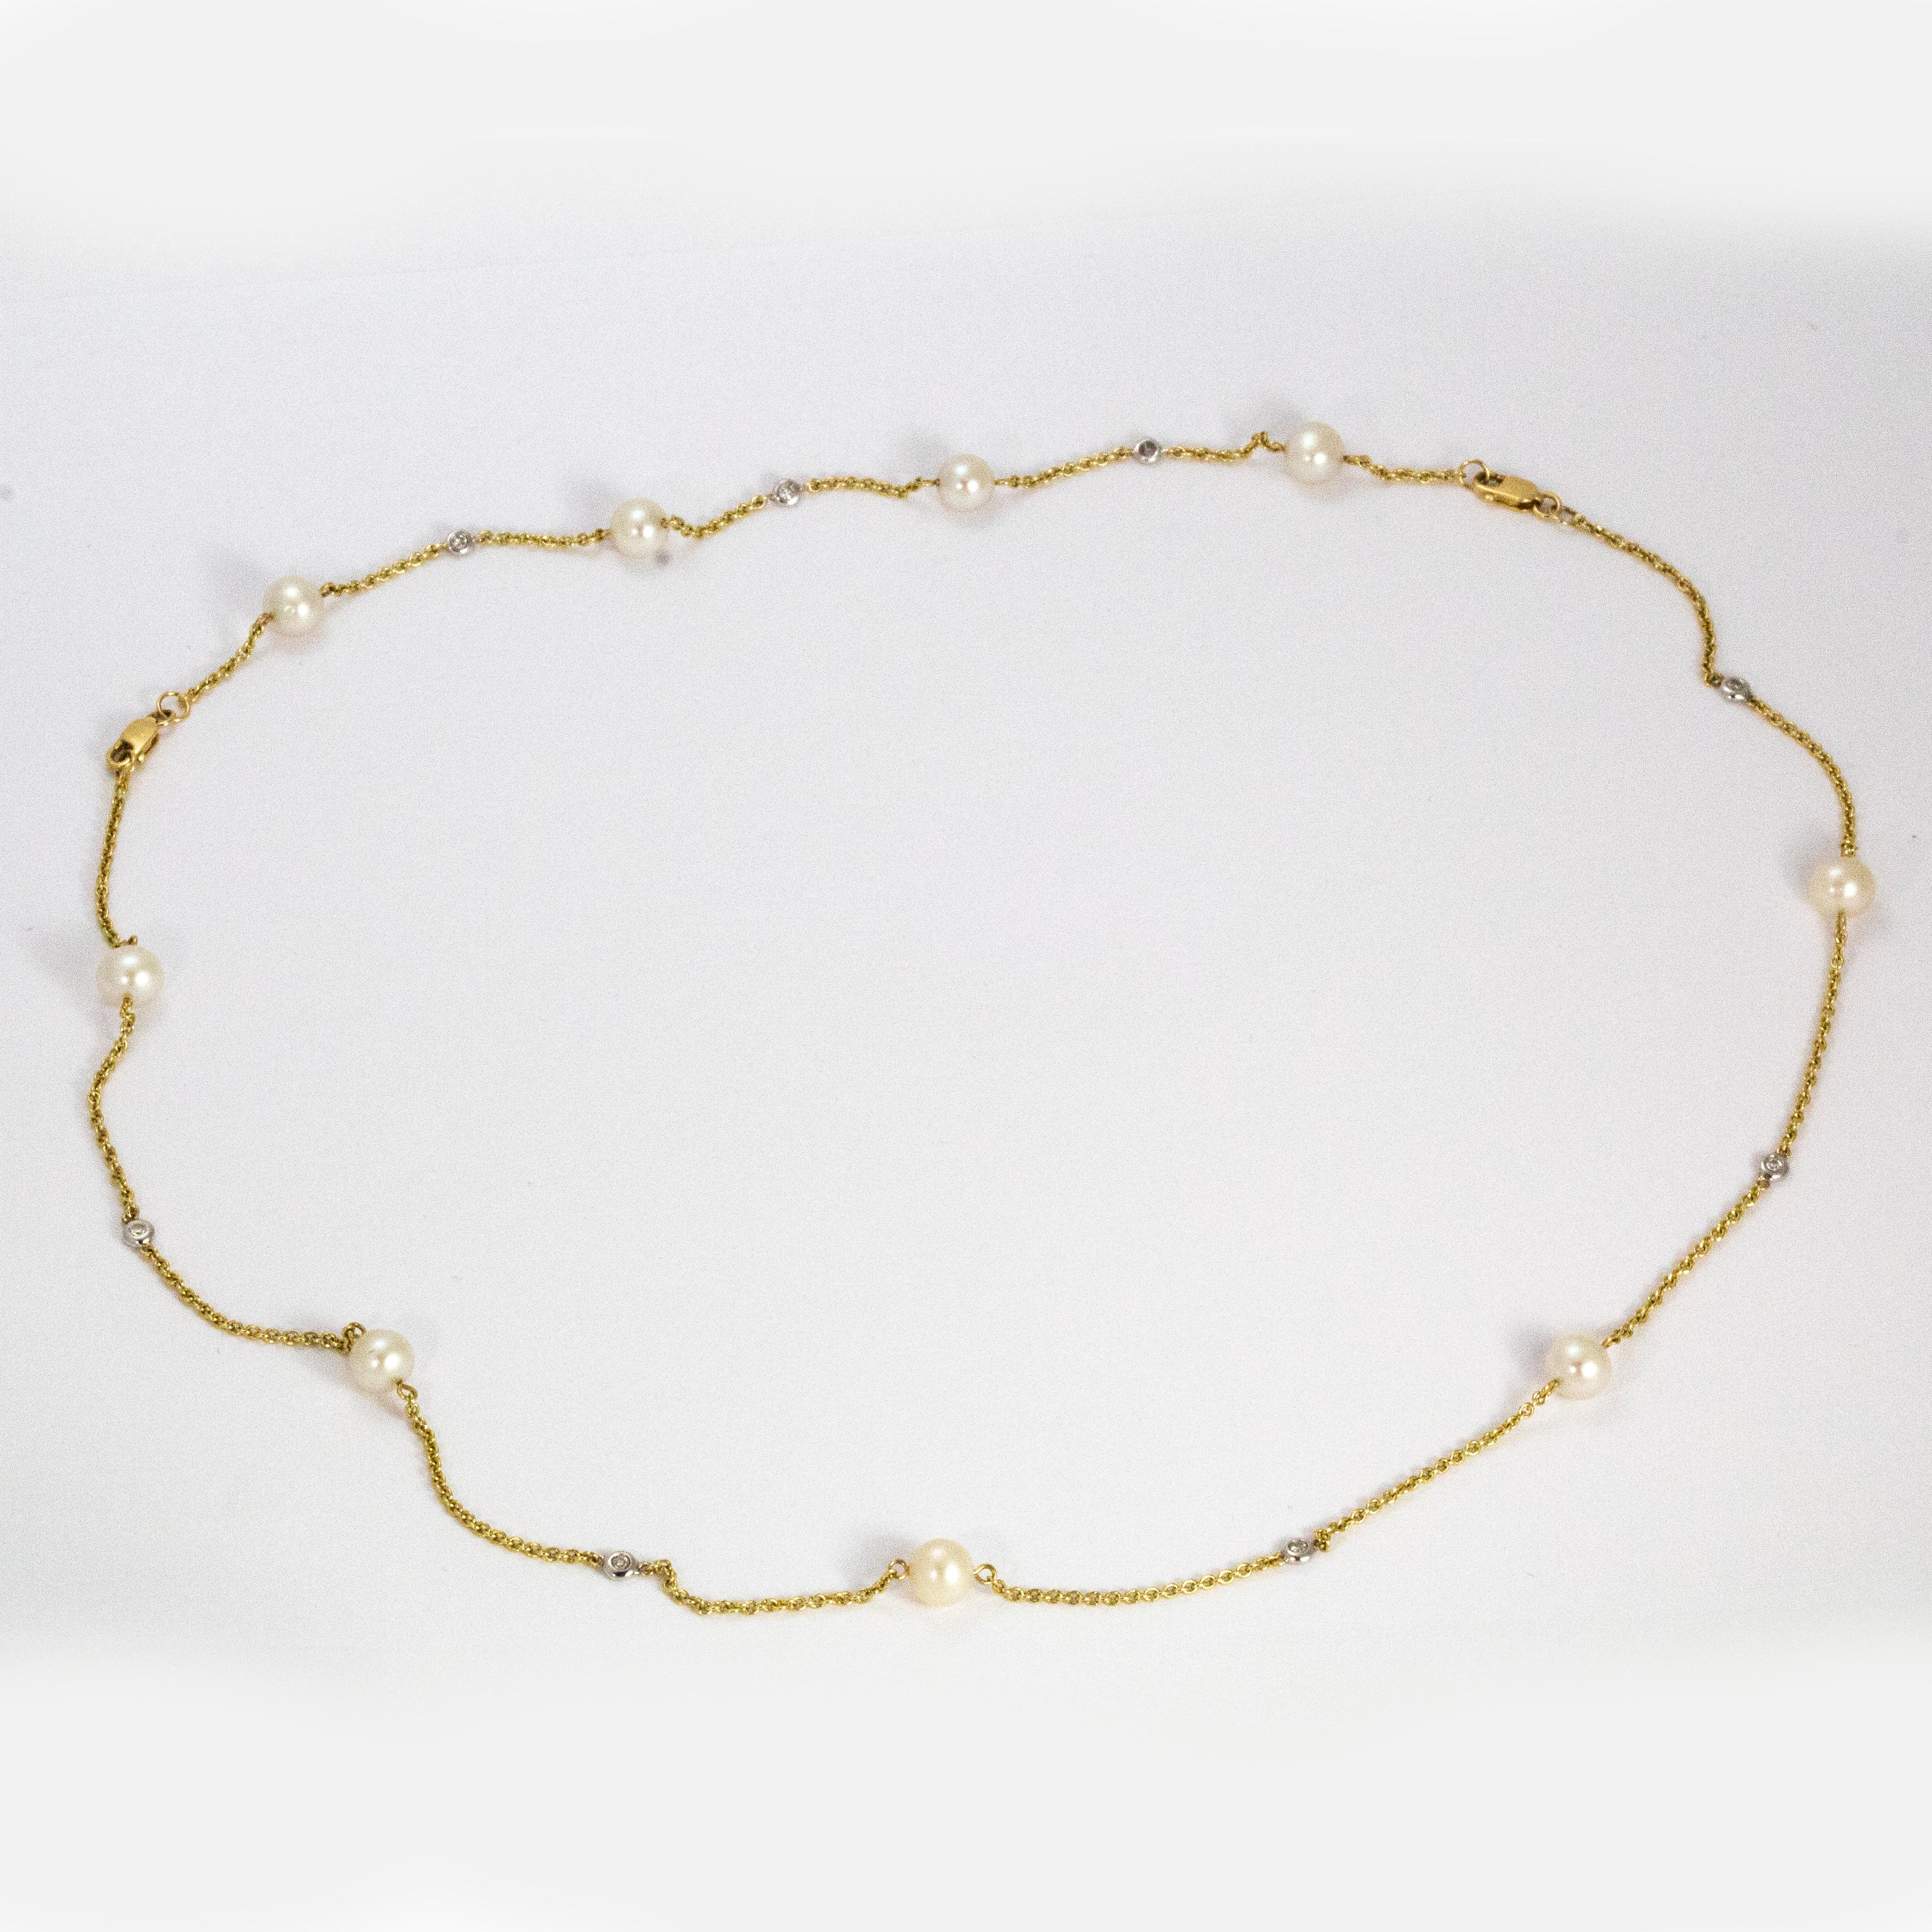 Delicate and unbelievably pretty, this 14ct gold necklace holds 9 pearls and  8 diamonds. As you can see from the images this necklace can be made into a bracelet also!

Necklace length: 16 1/2 inches
Bracelet length: 7 inches 
